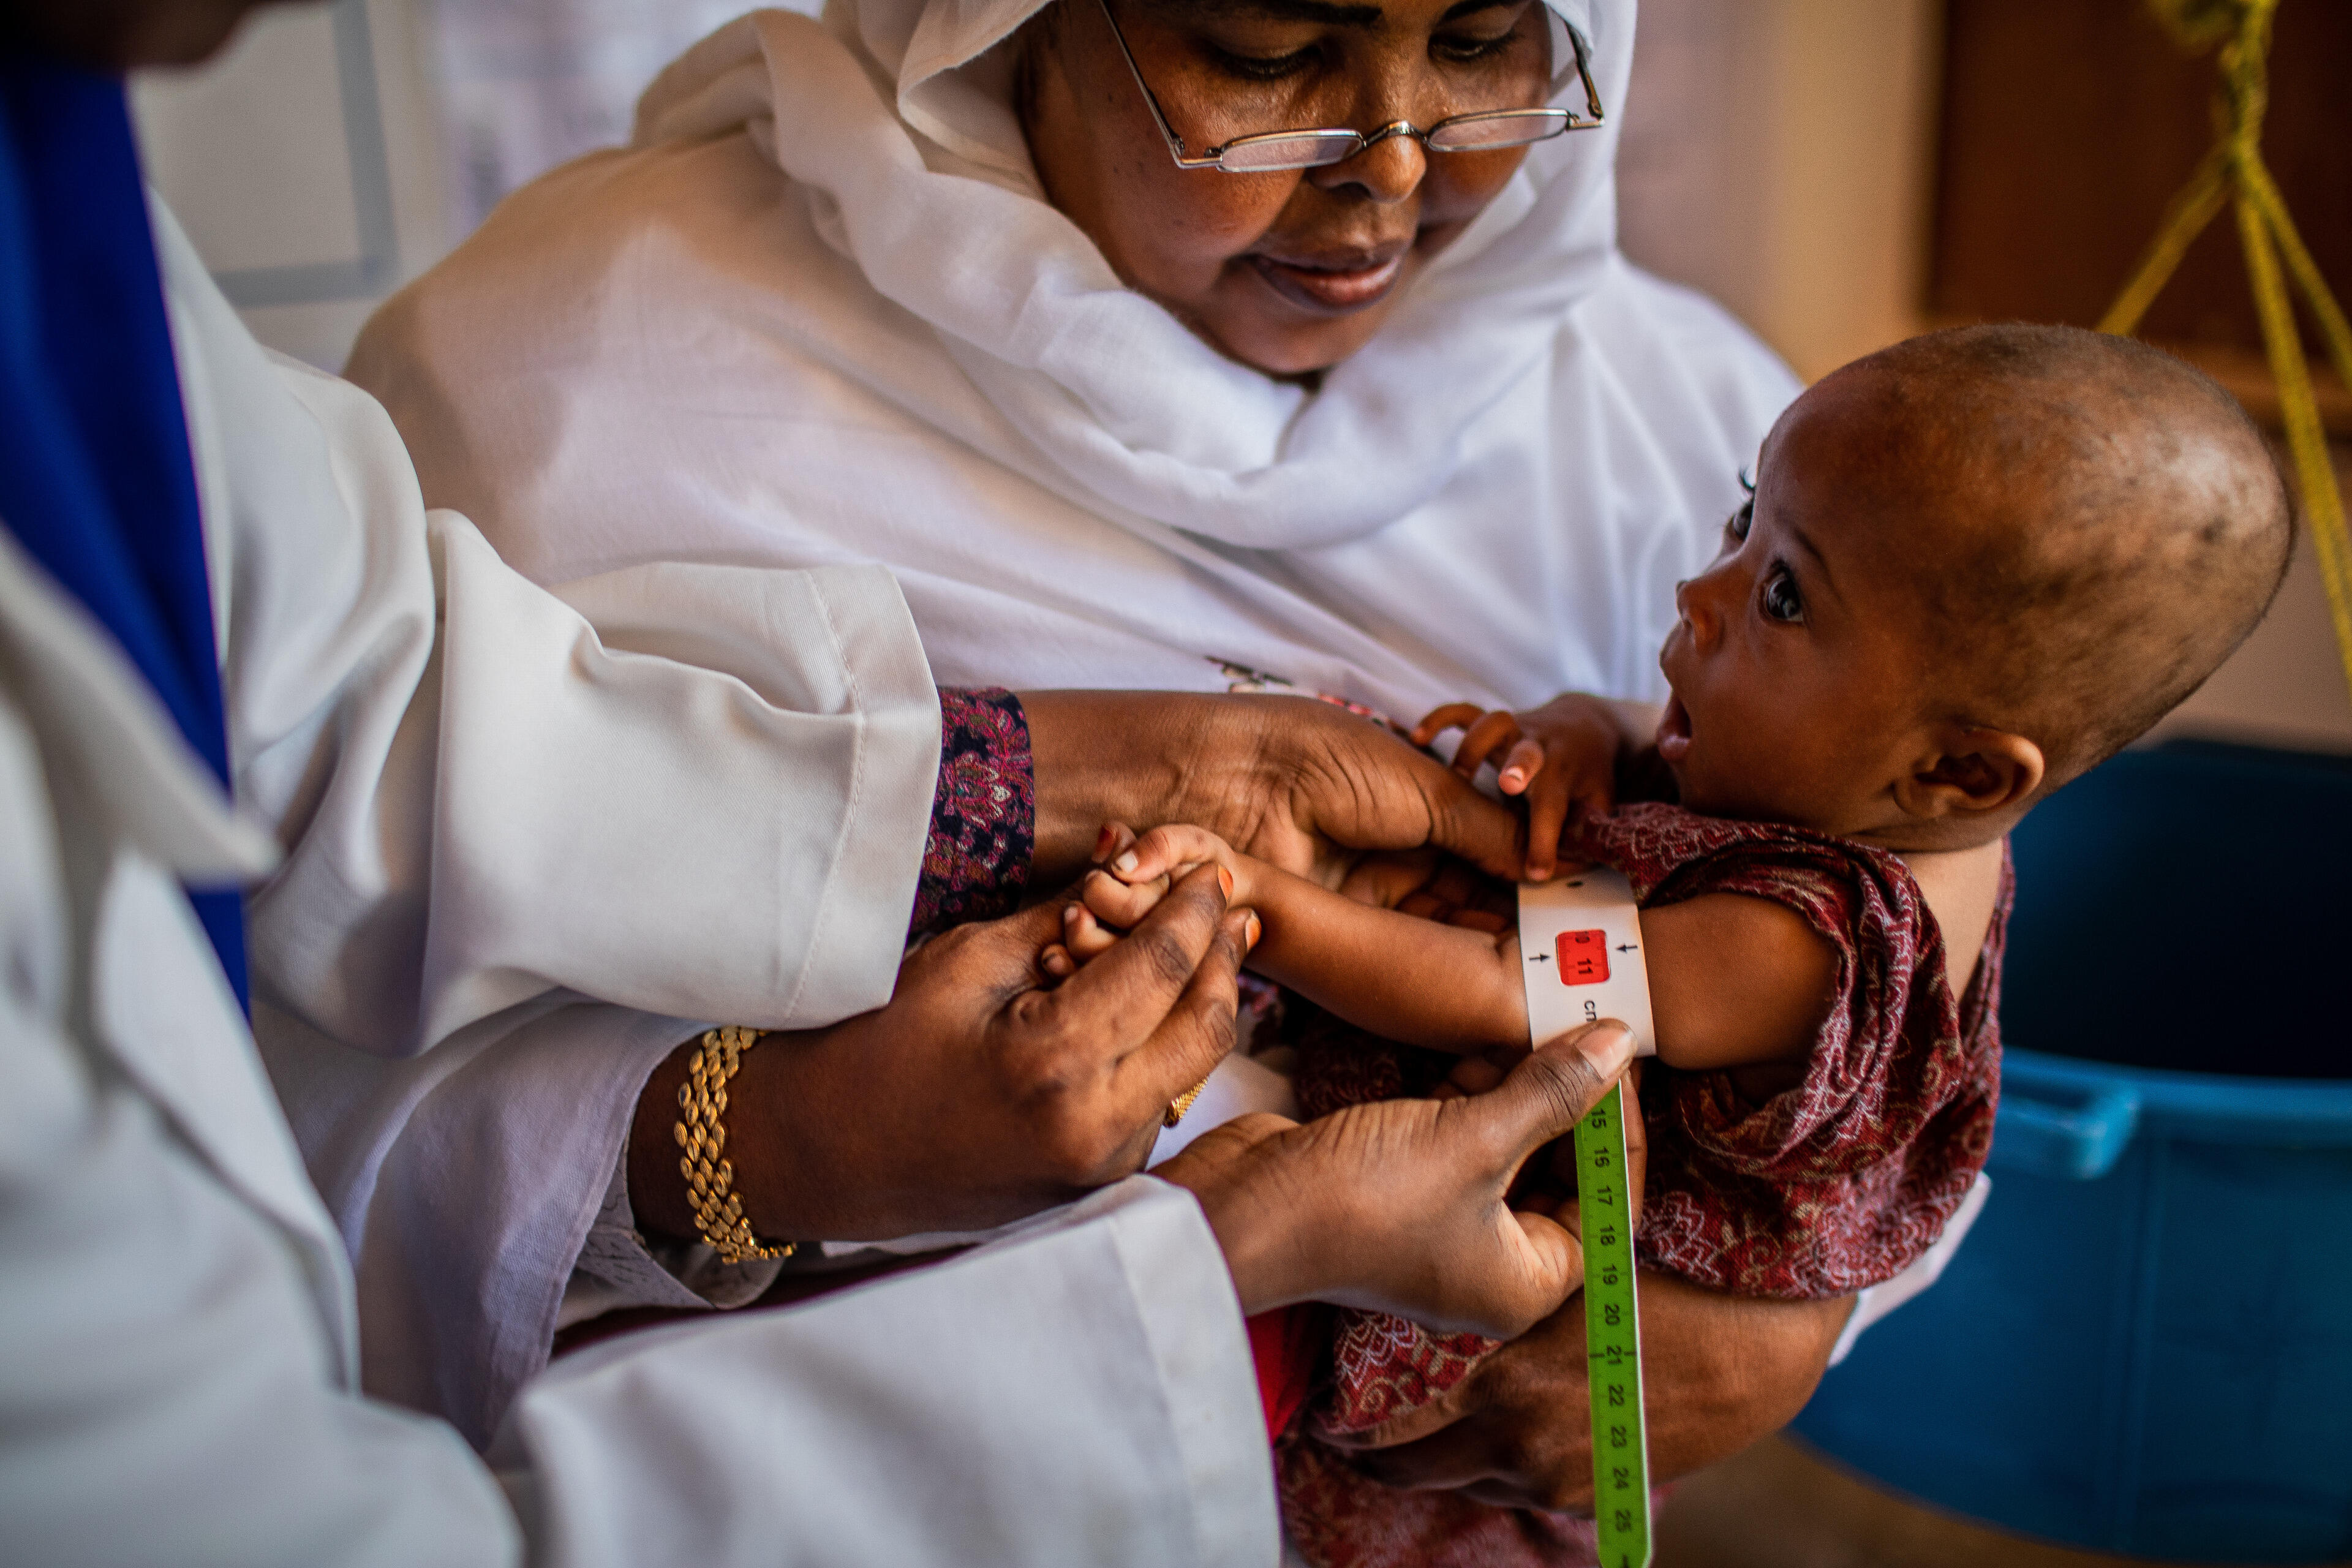 A health worker in Somalia measures a baby's upper arm with a special measuring tape to check for signs of malnutrition.